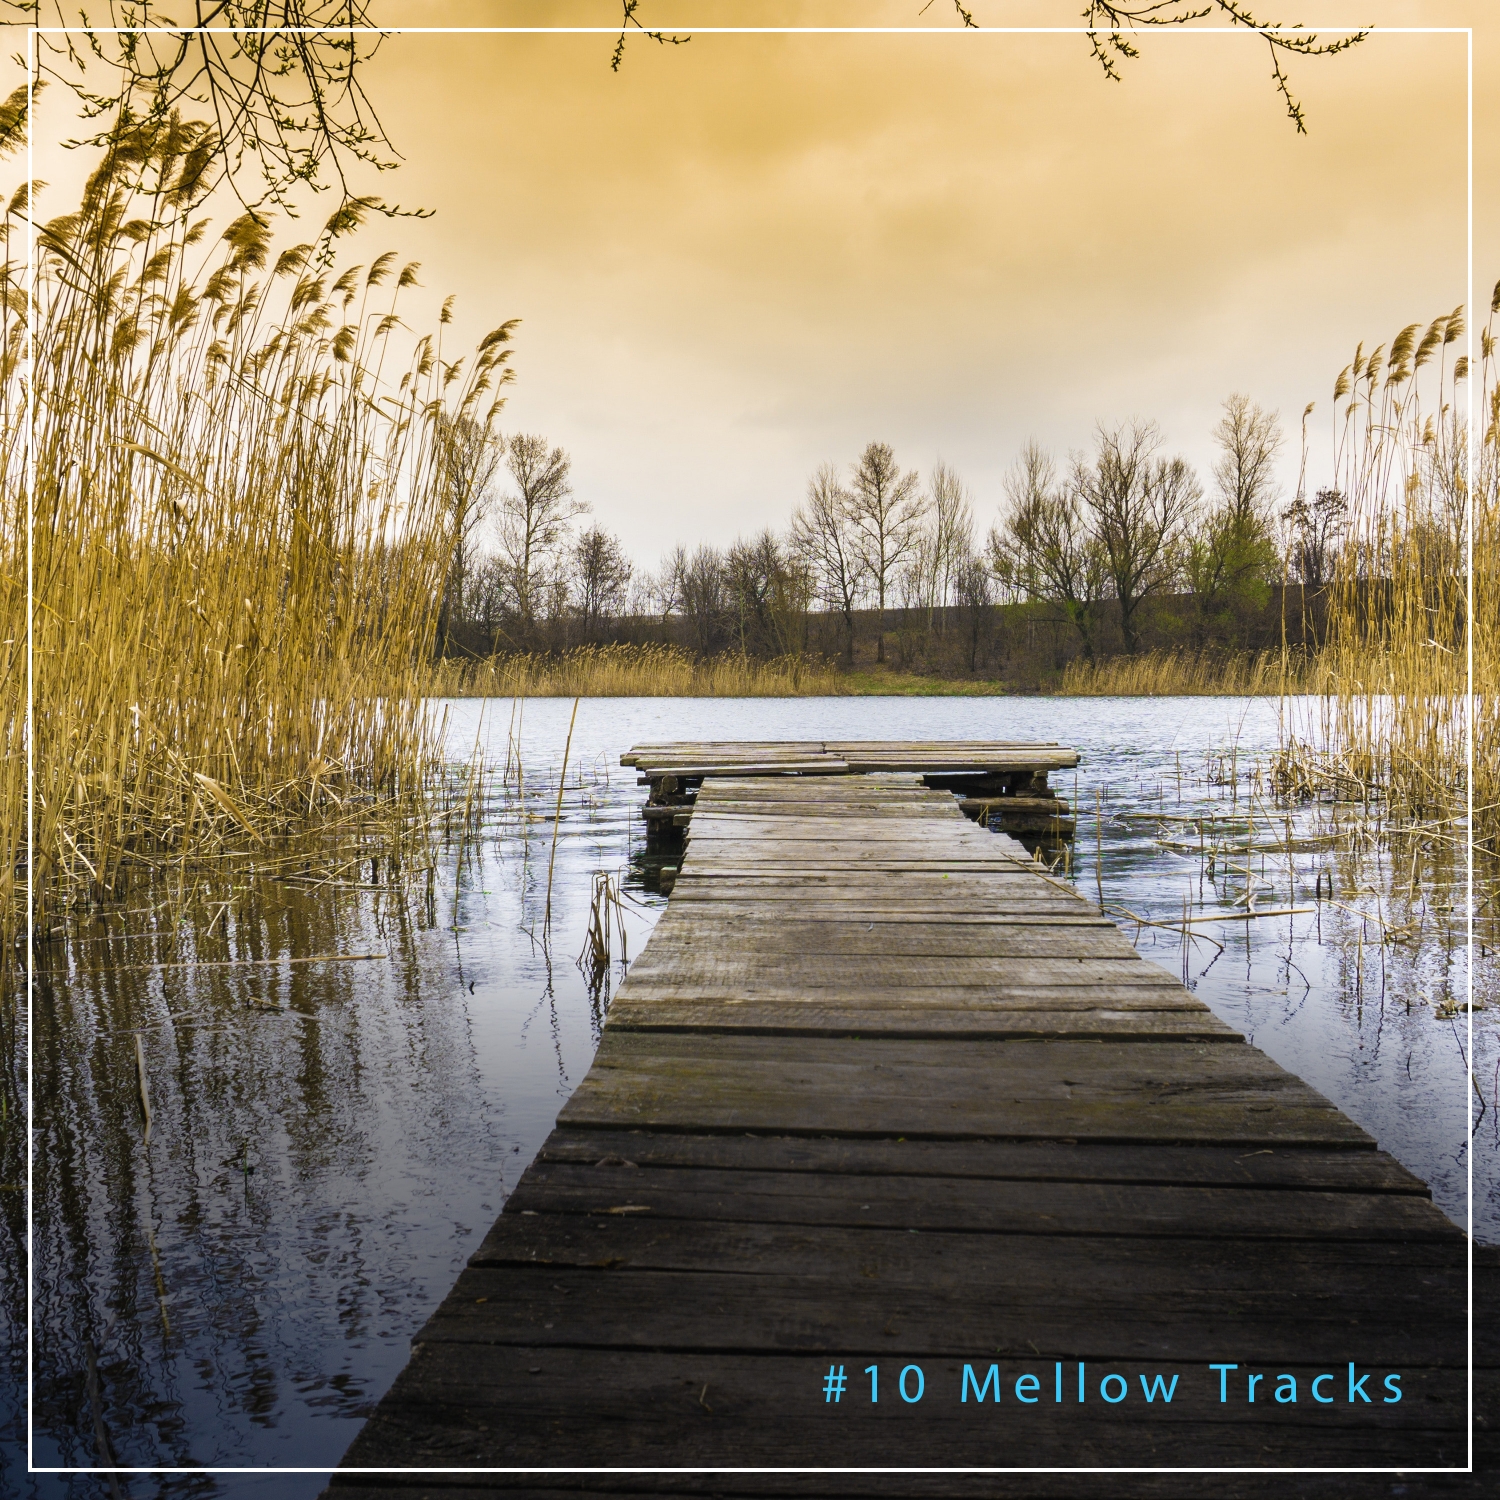 #10 Mellow Tracks for Sleeping Peacefully